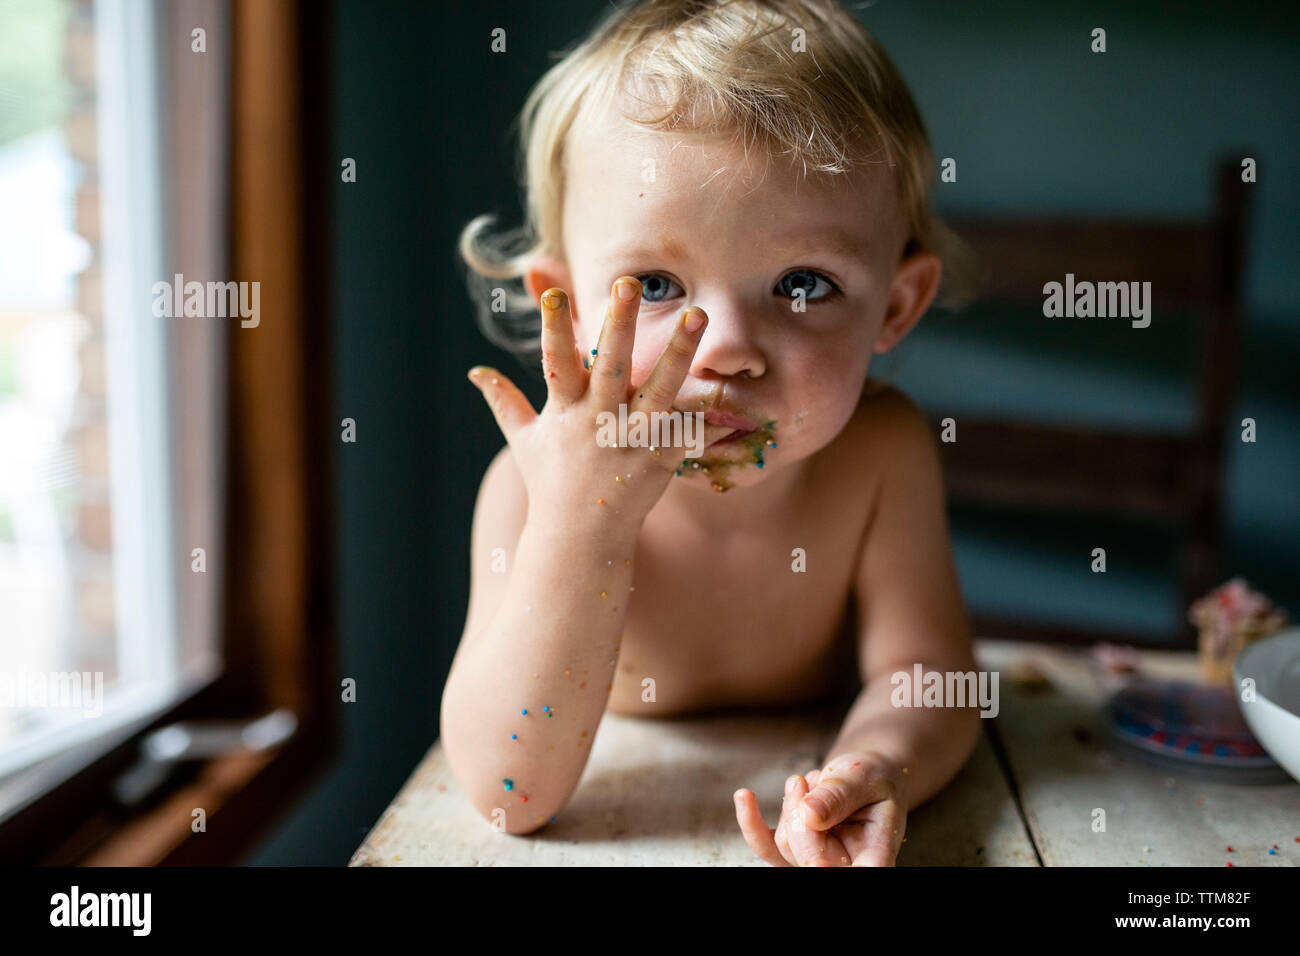 Toddler girl licking sticky fingers with colorful sprinkles Stock Photo